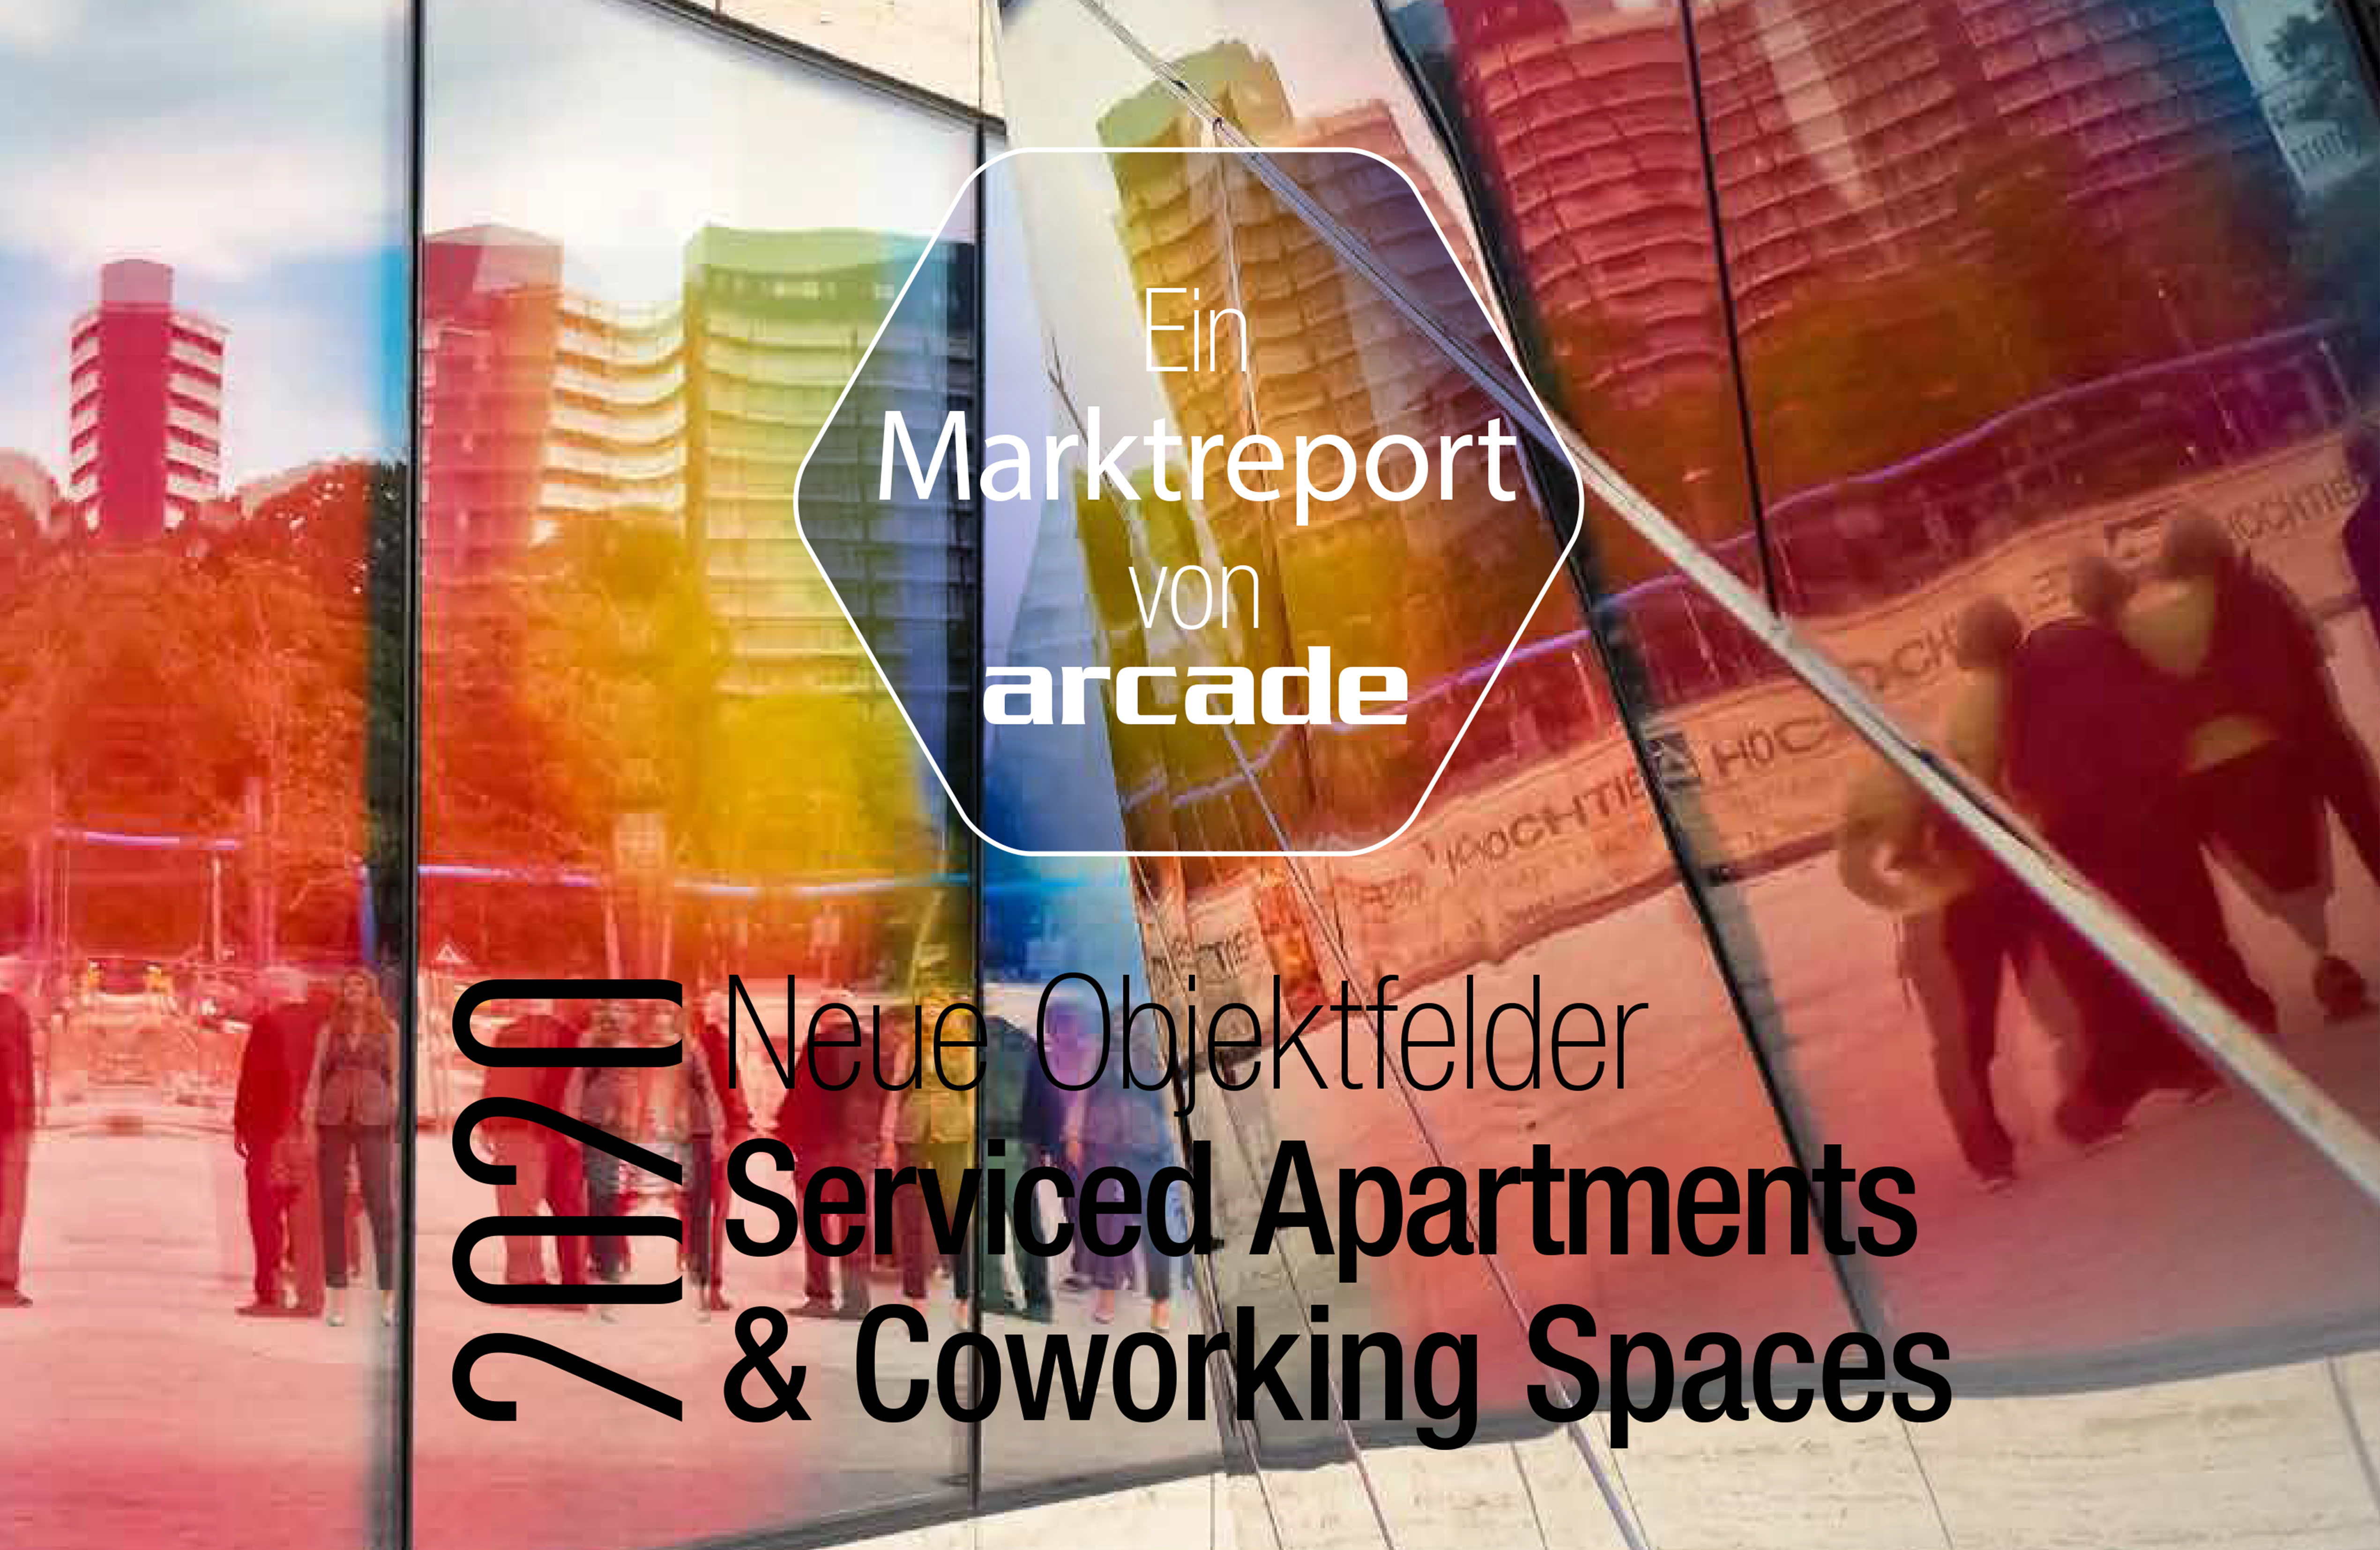 Marktreport Serviced Apartments & Coworking Spaces